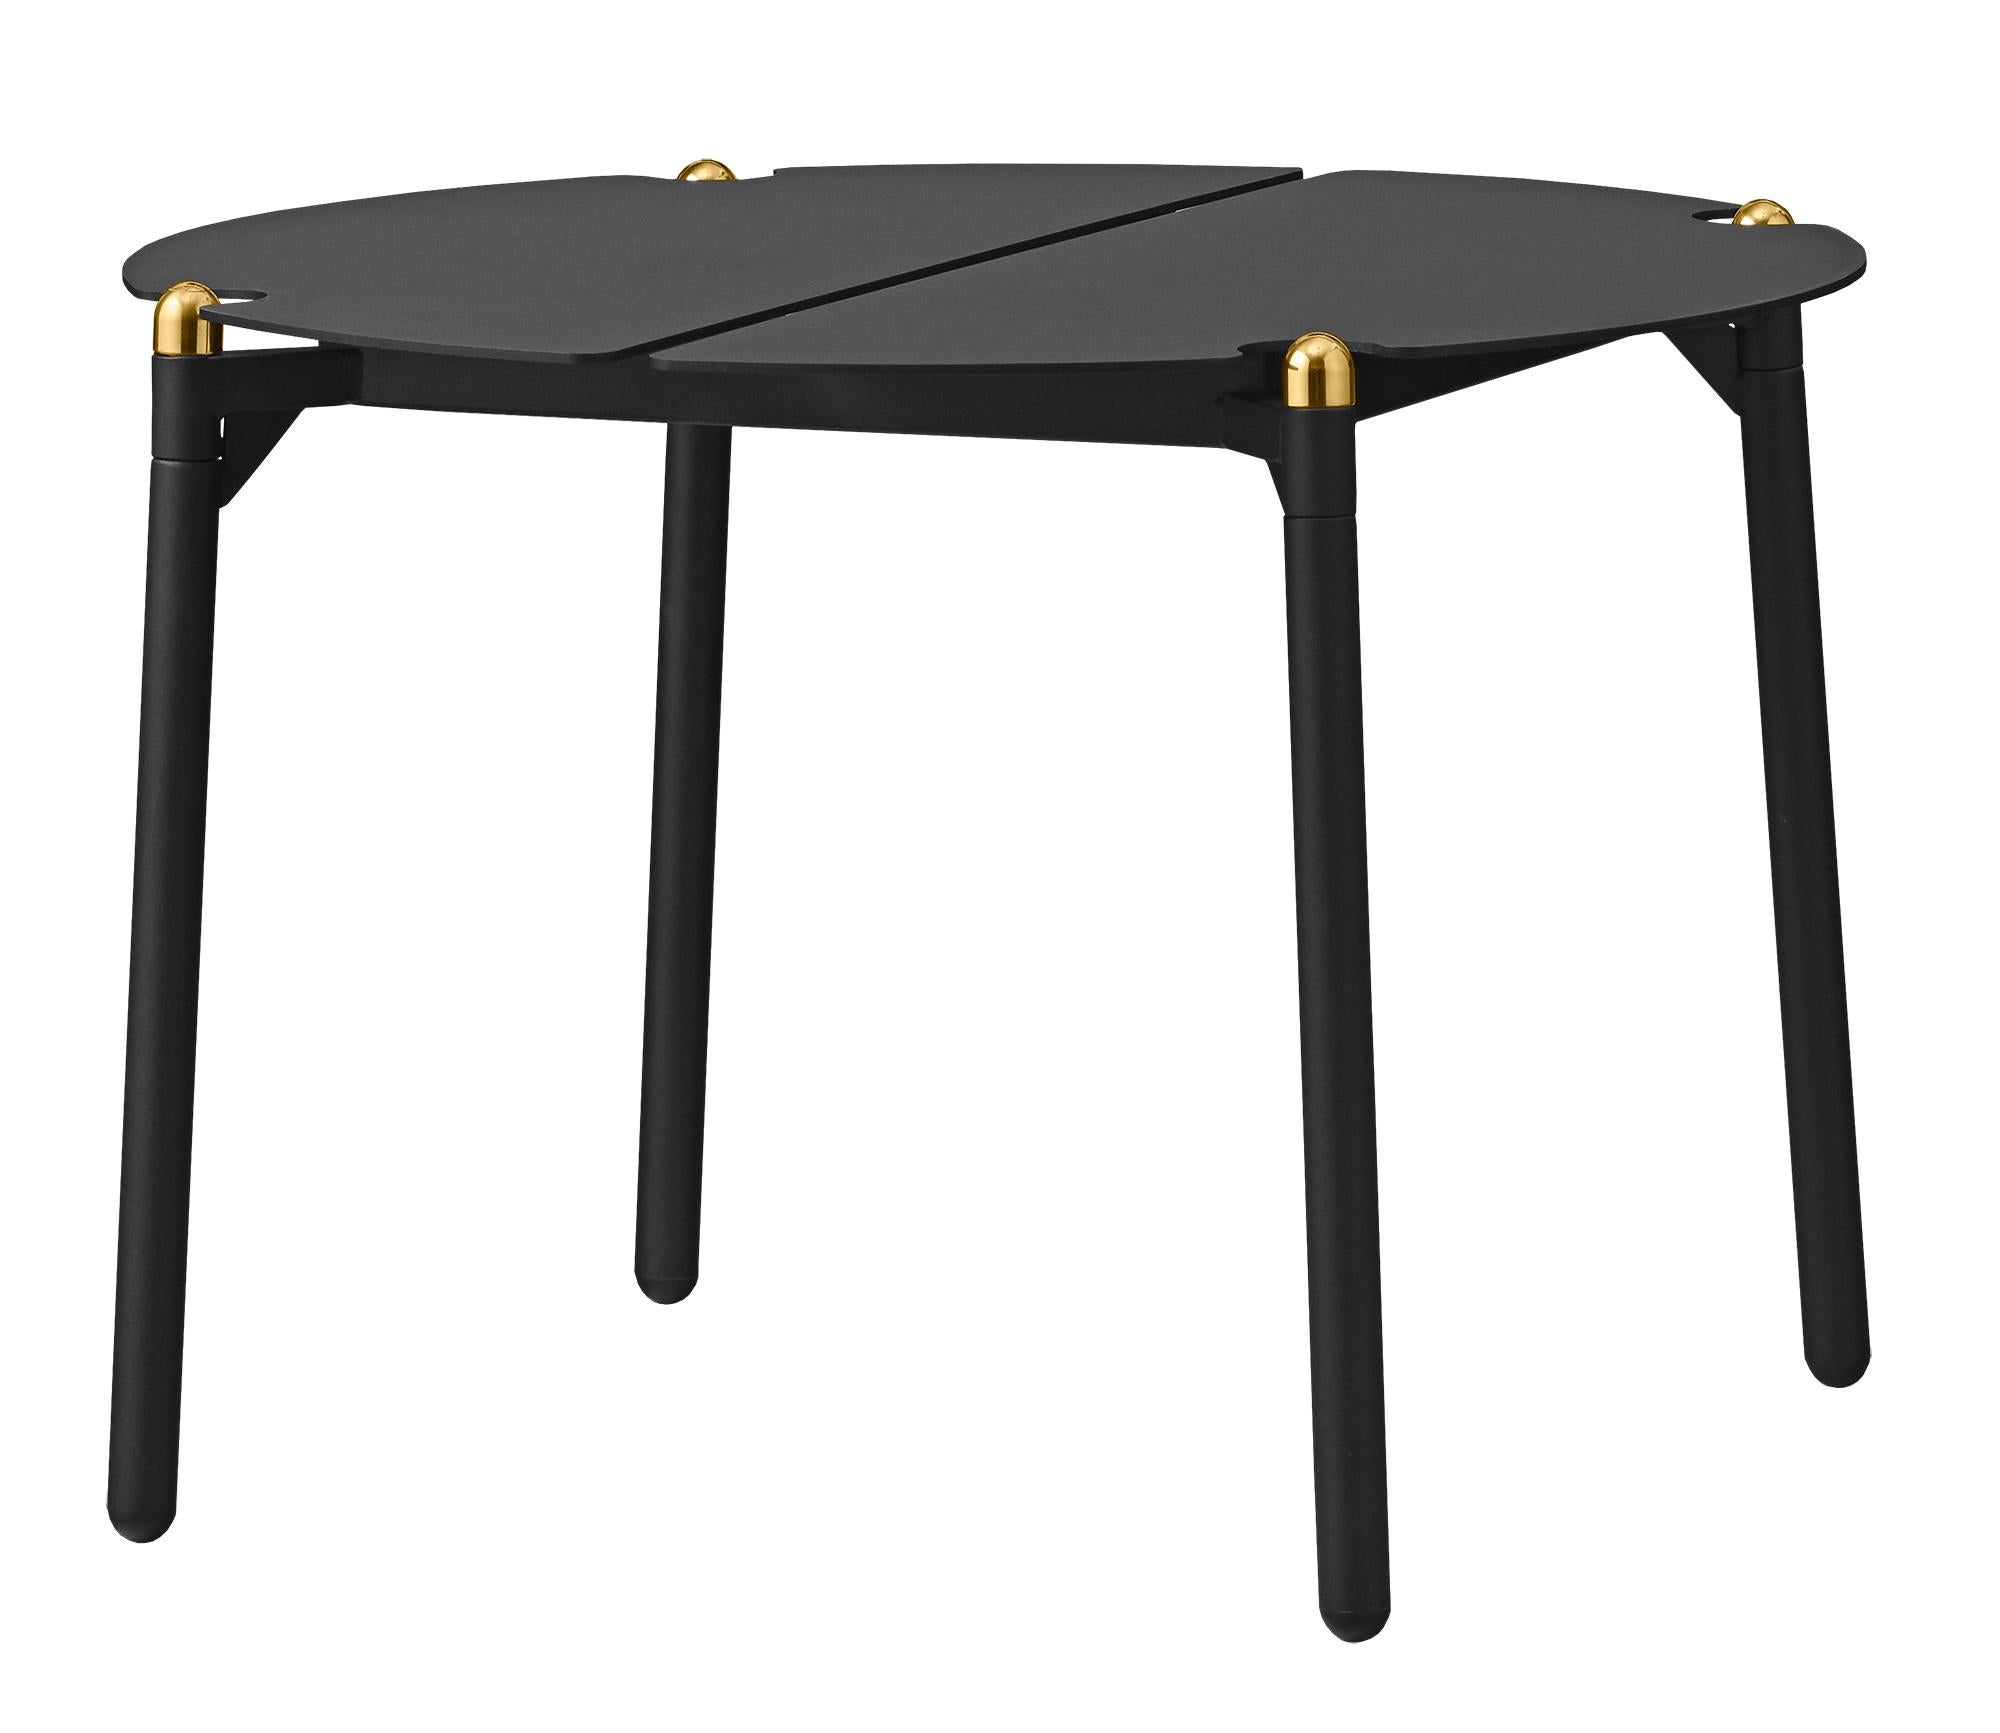 Small Black and Gold Minimalist lounge table
Dimensions: Diameter 50 x H 35 cm 
Materials: Steel w. Matte Powder Coating, Aluminum w. Matte Powder Coating & Stainless Steel w. Gold Titanium Plating.
Available in colors: Taupe, Bordeaux, Forest,